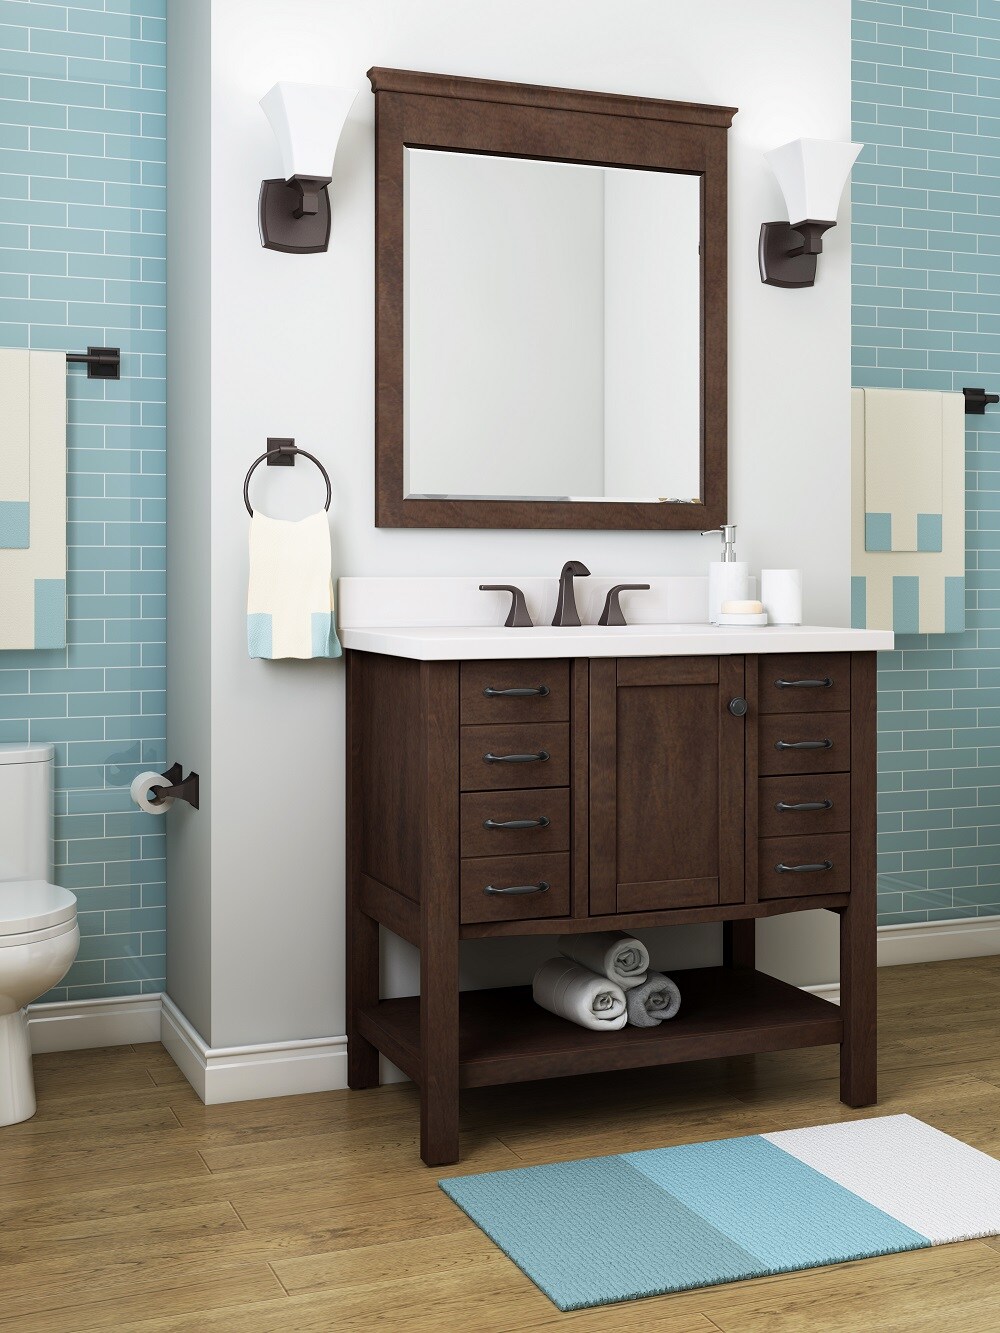 the Engineered Kingscote allen Bathroom Top Single department at with with roth Vanity Sink in Bathroom Stone Undermount 36-in + Tops Vanities Espresso White